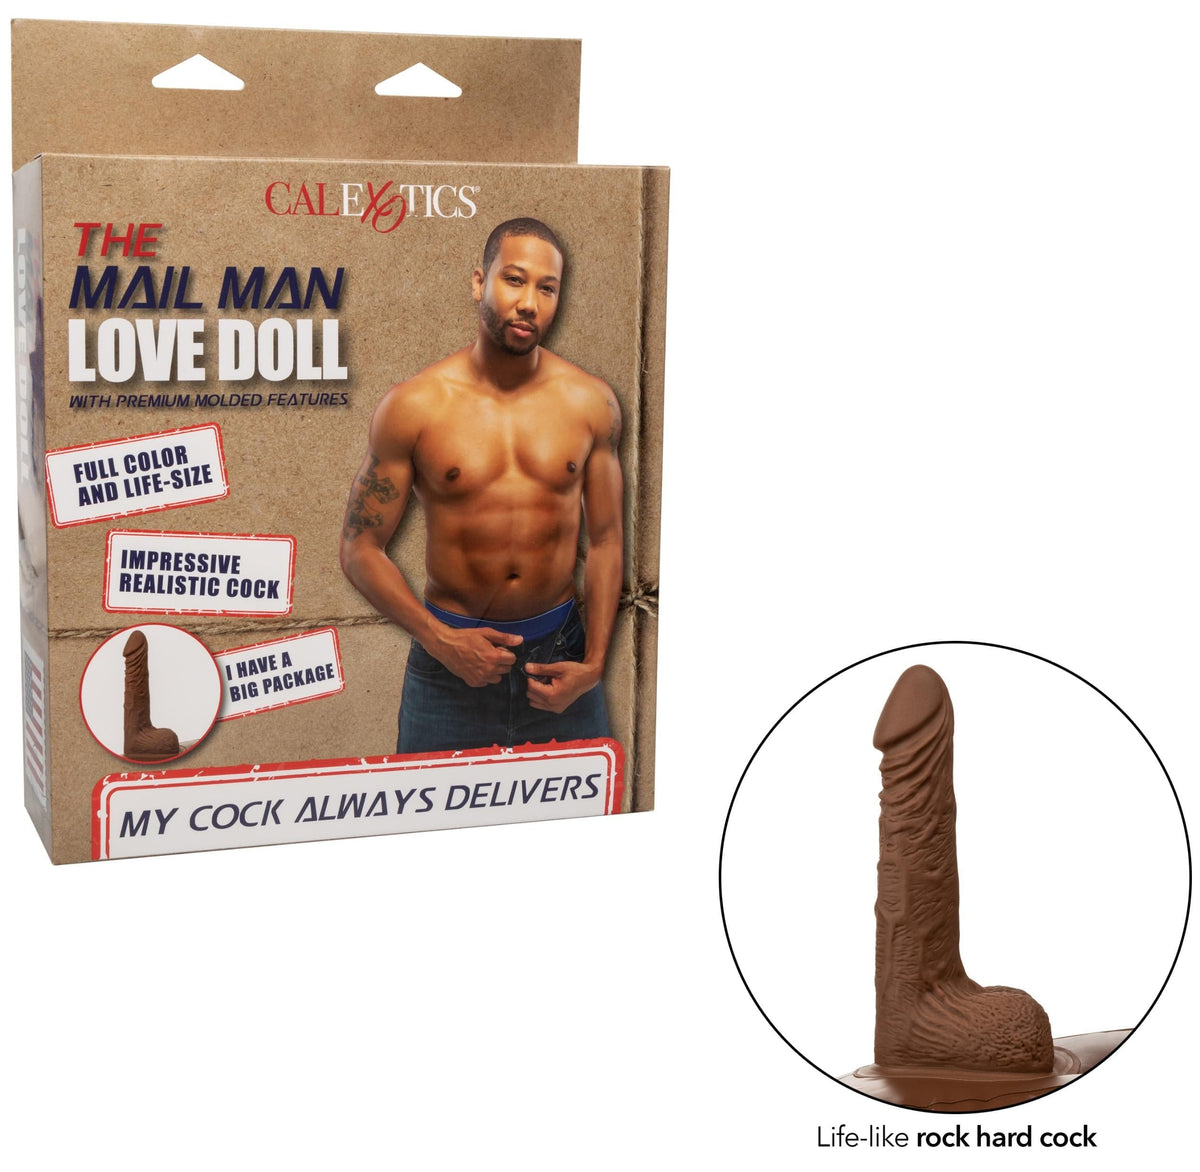 the mail man love doll